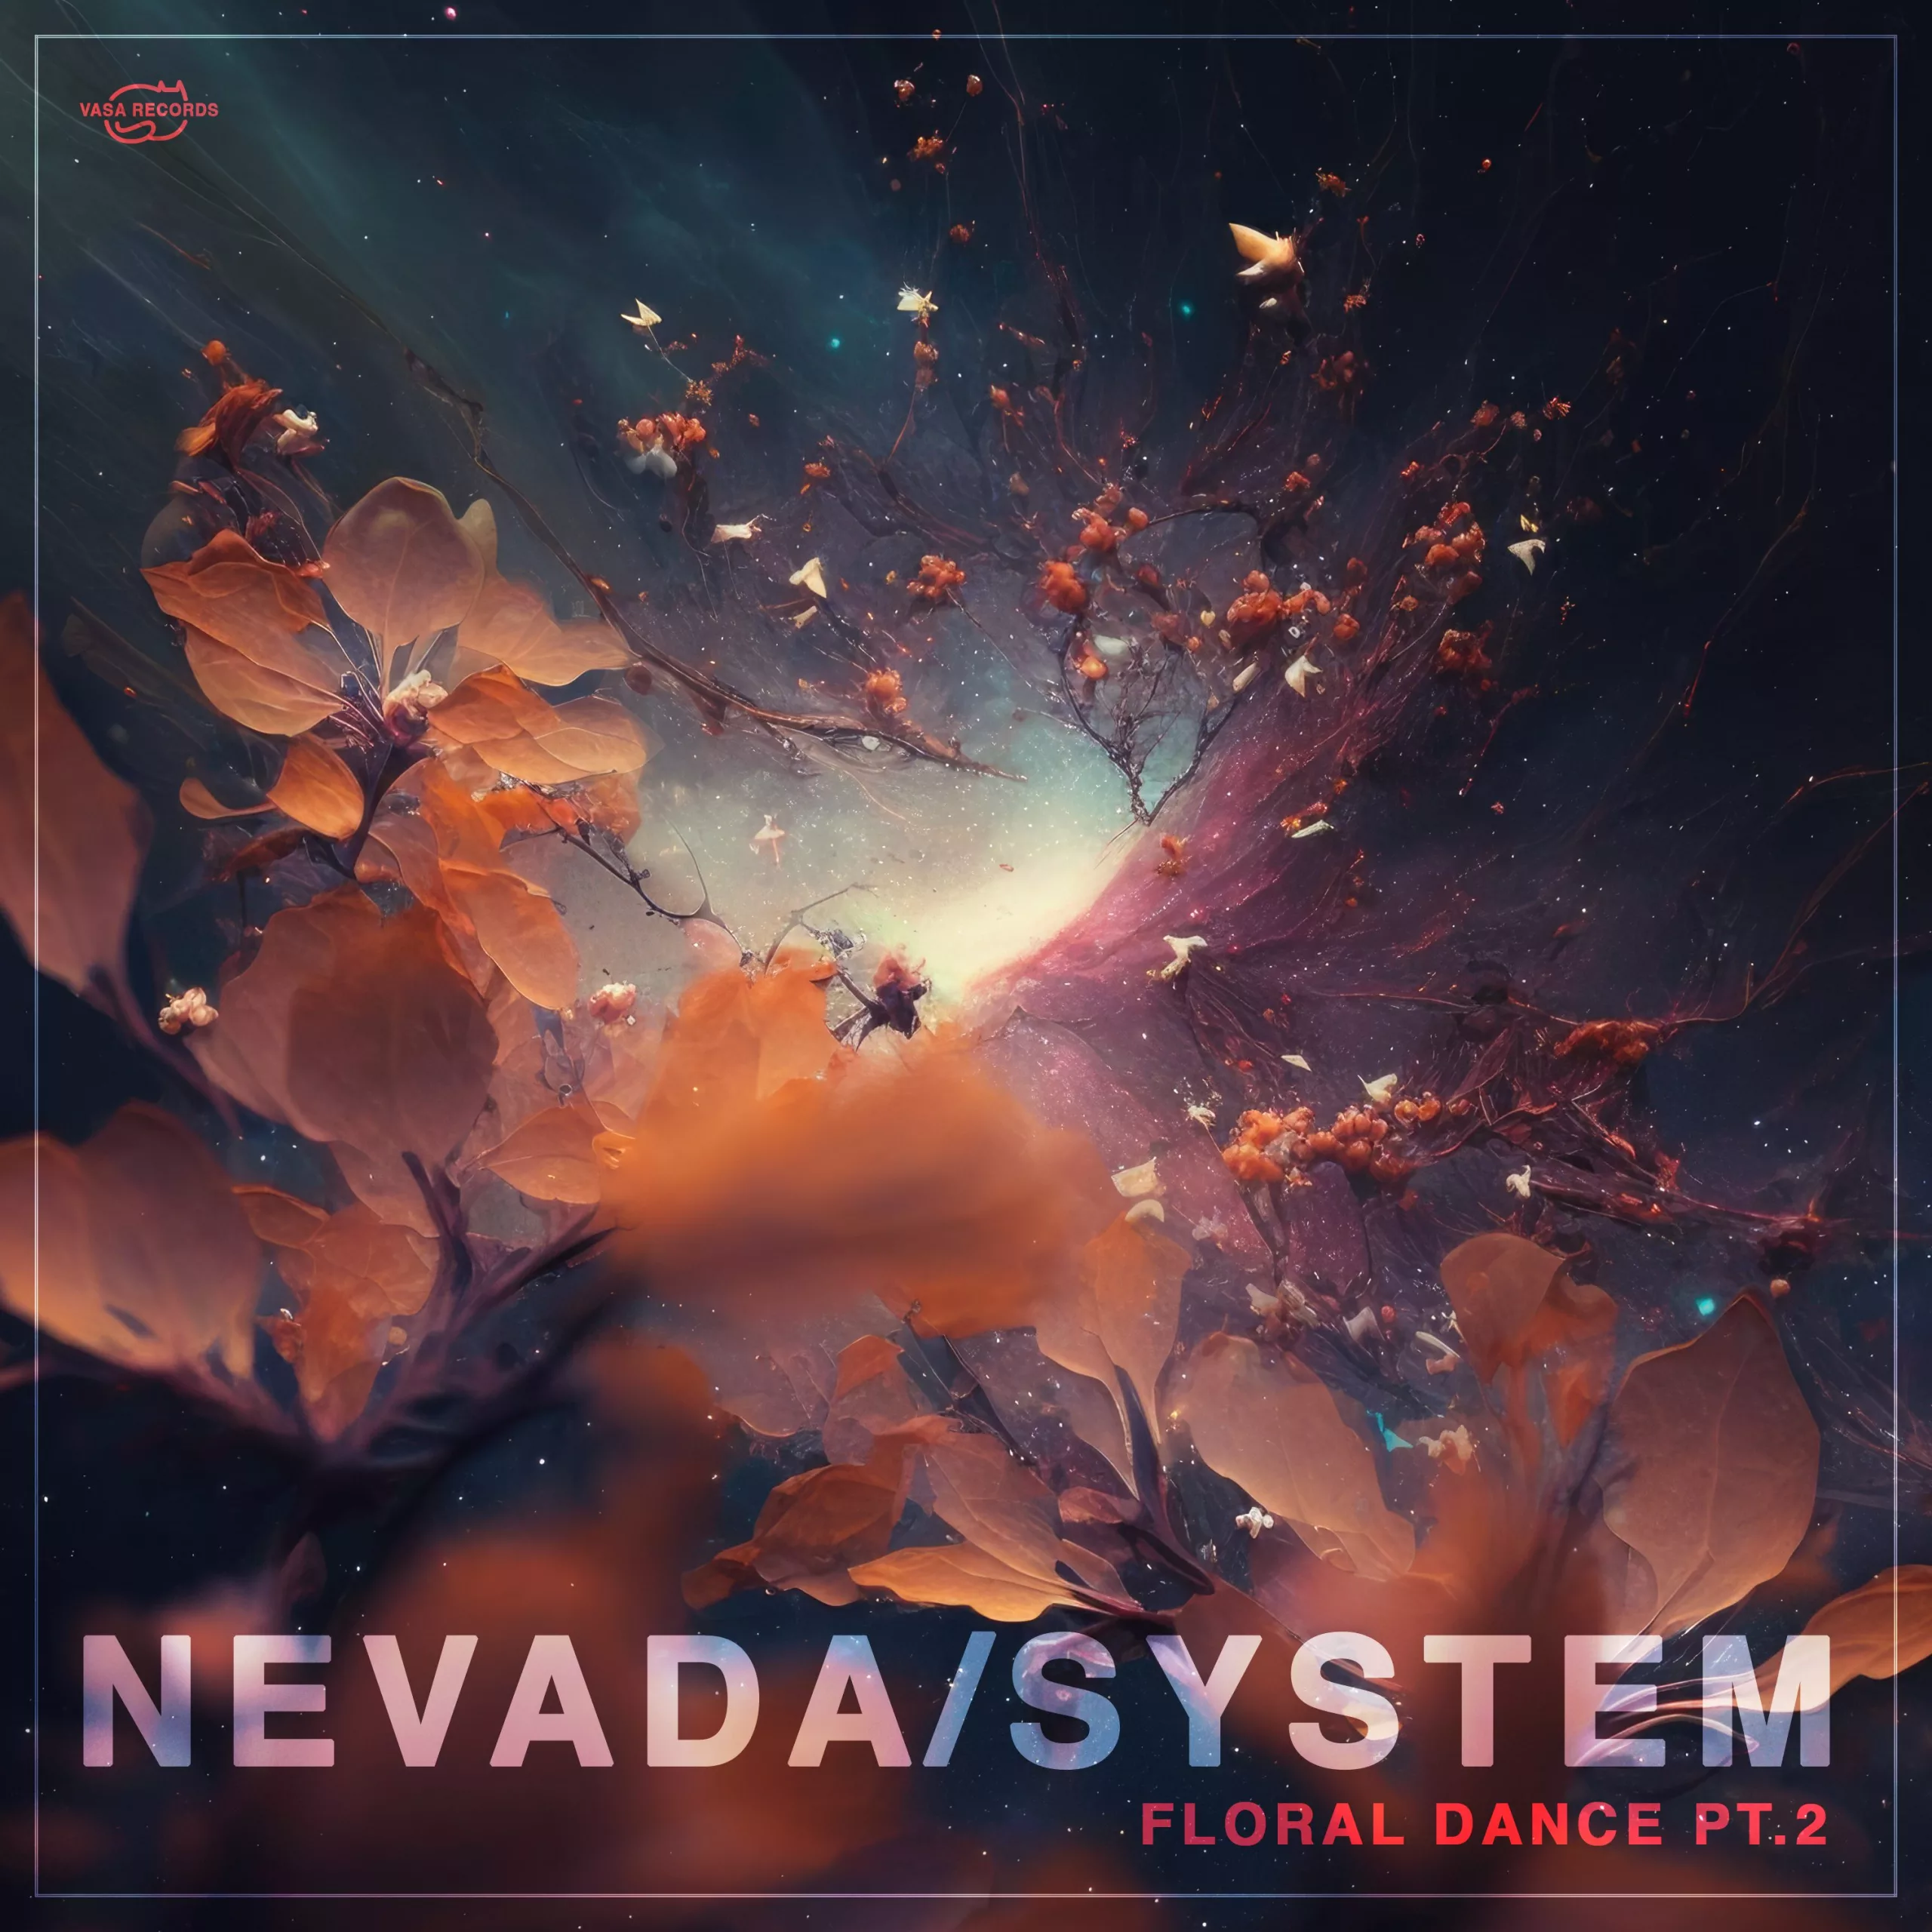 NevadaSYSTEM DROPS “Floral Dance Part 2” EP AS HIS SECOND INSTALLMENT OF RECENT “FLORAL DANCE” MELODIC TECHNO SMASH HIT. 